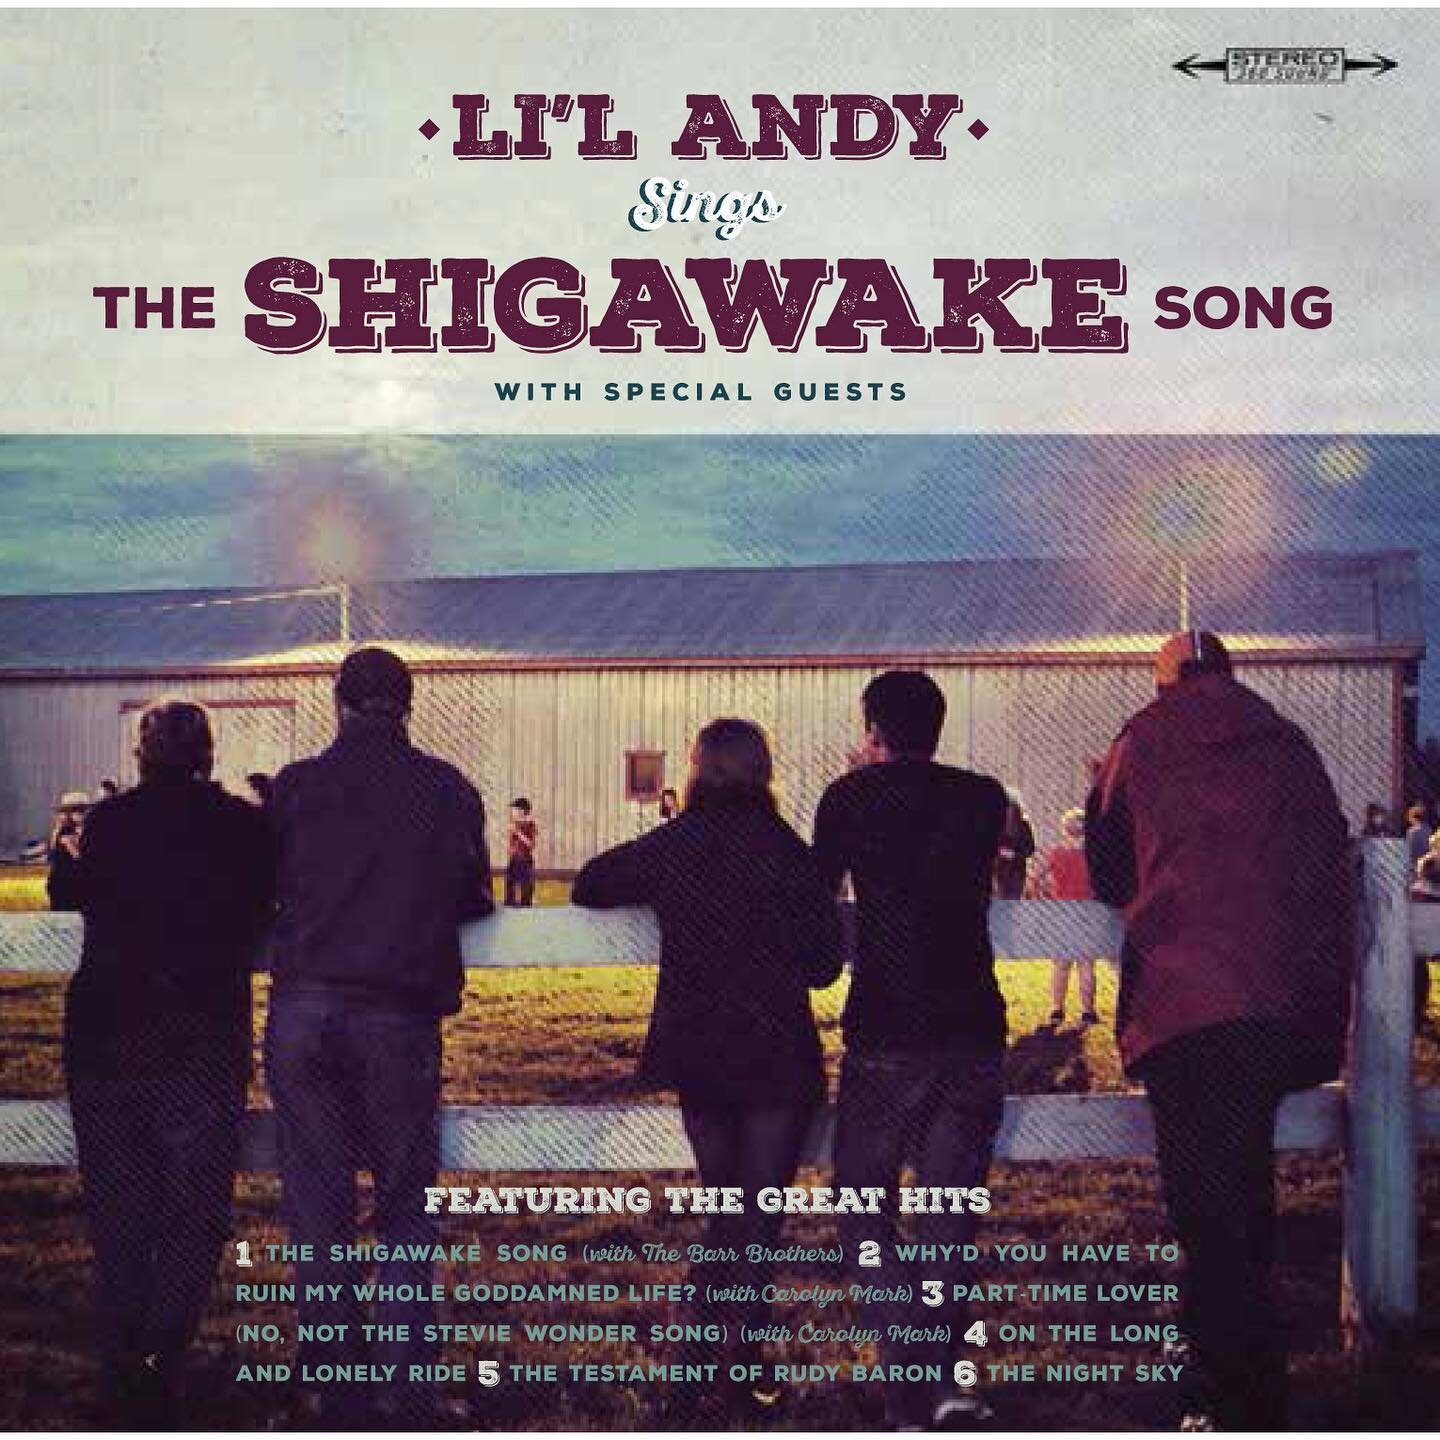 I&rsquo;m headin&rsquo; to the Gasp&eacute; this week to play as BOTH of my personas at the legendary Shigawake Music Festival!

The Shigawake Fest has been bringing the best of Canadian music to the awesome, tiny coastal town for 13 years now and th